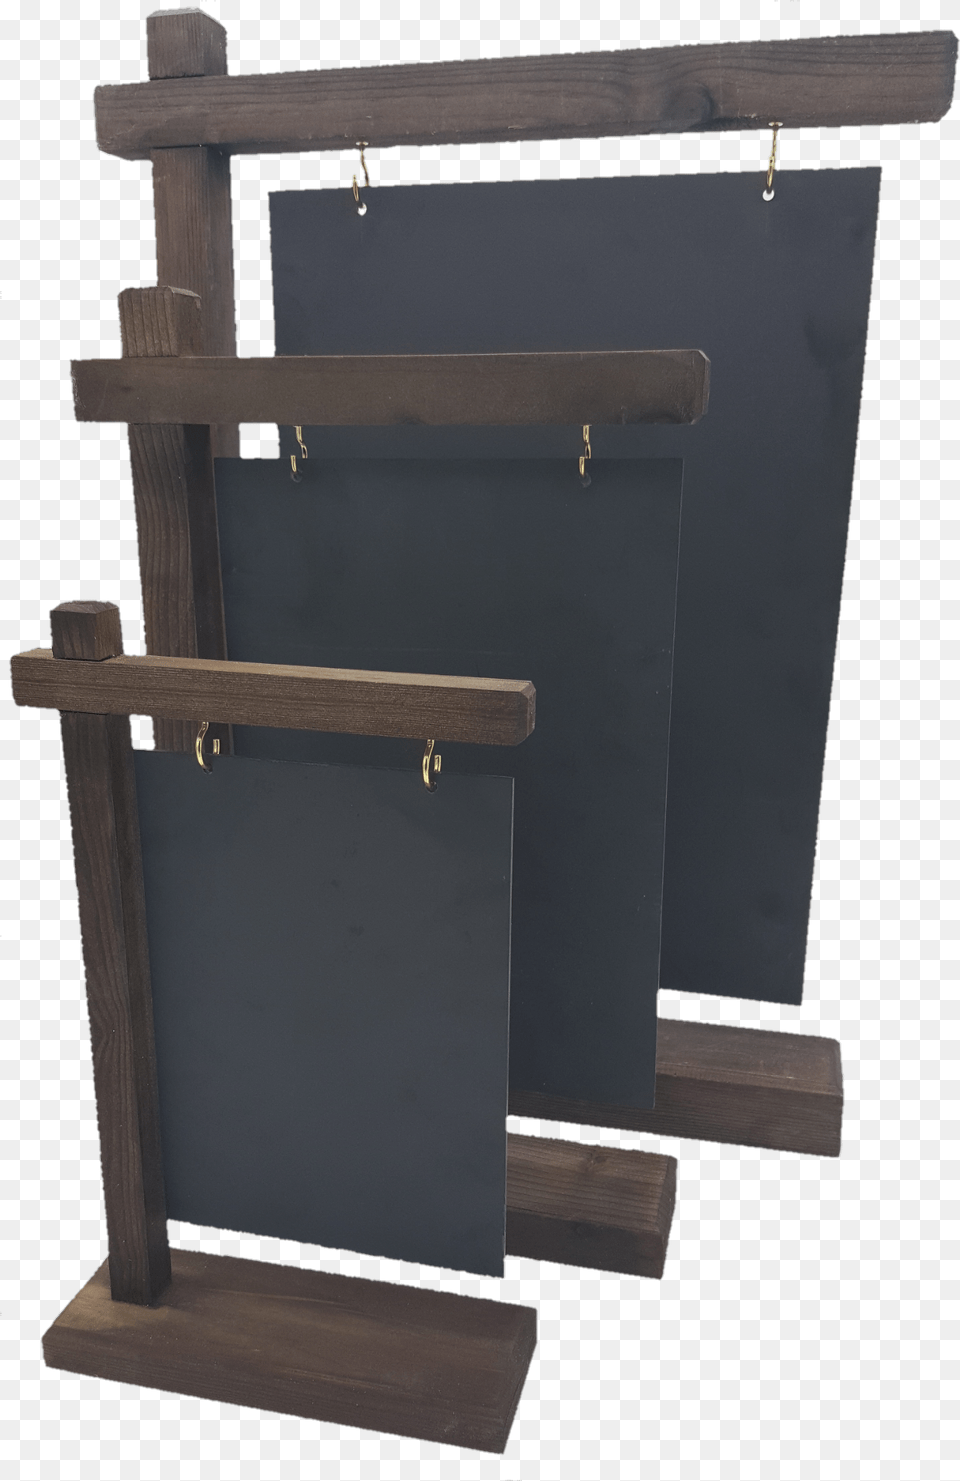 Plywood Free Transparent Png